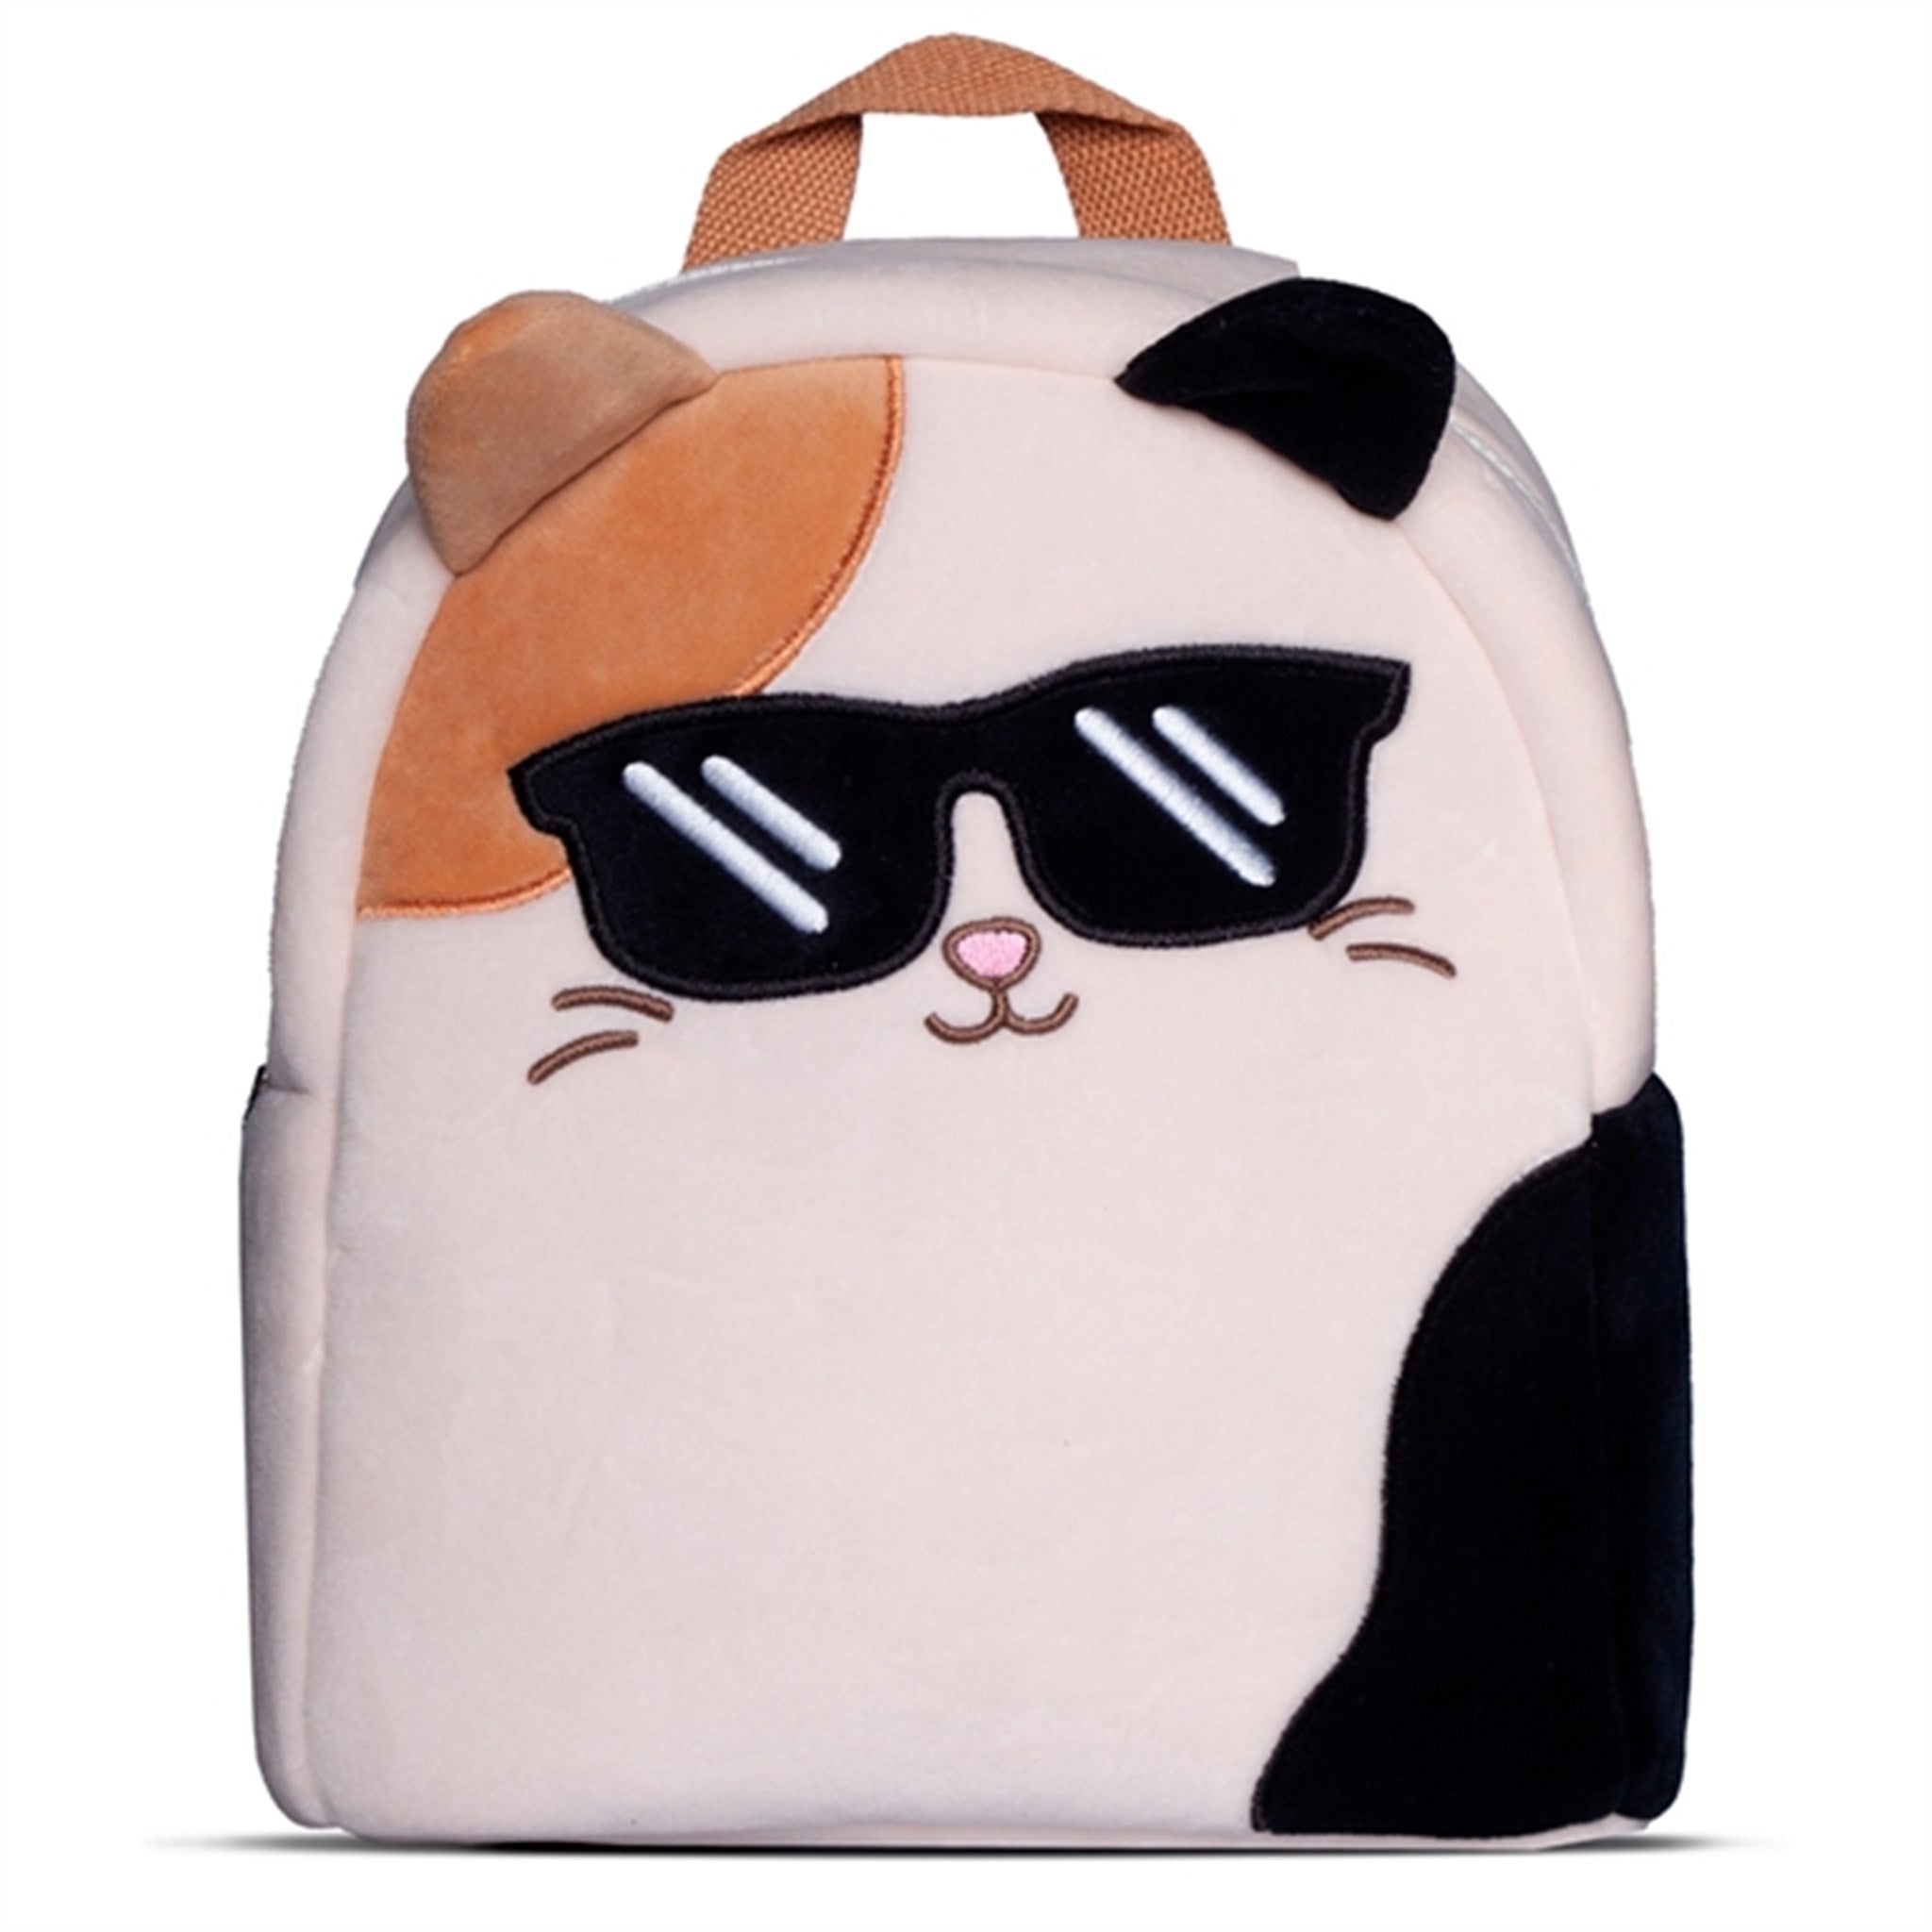 Squishmallows Backpack Cameron